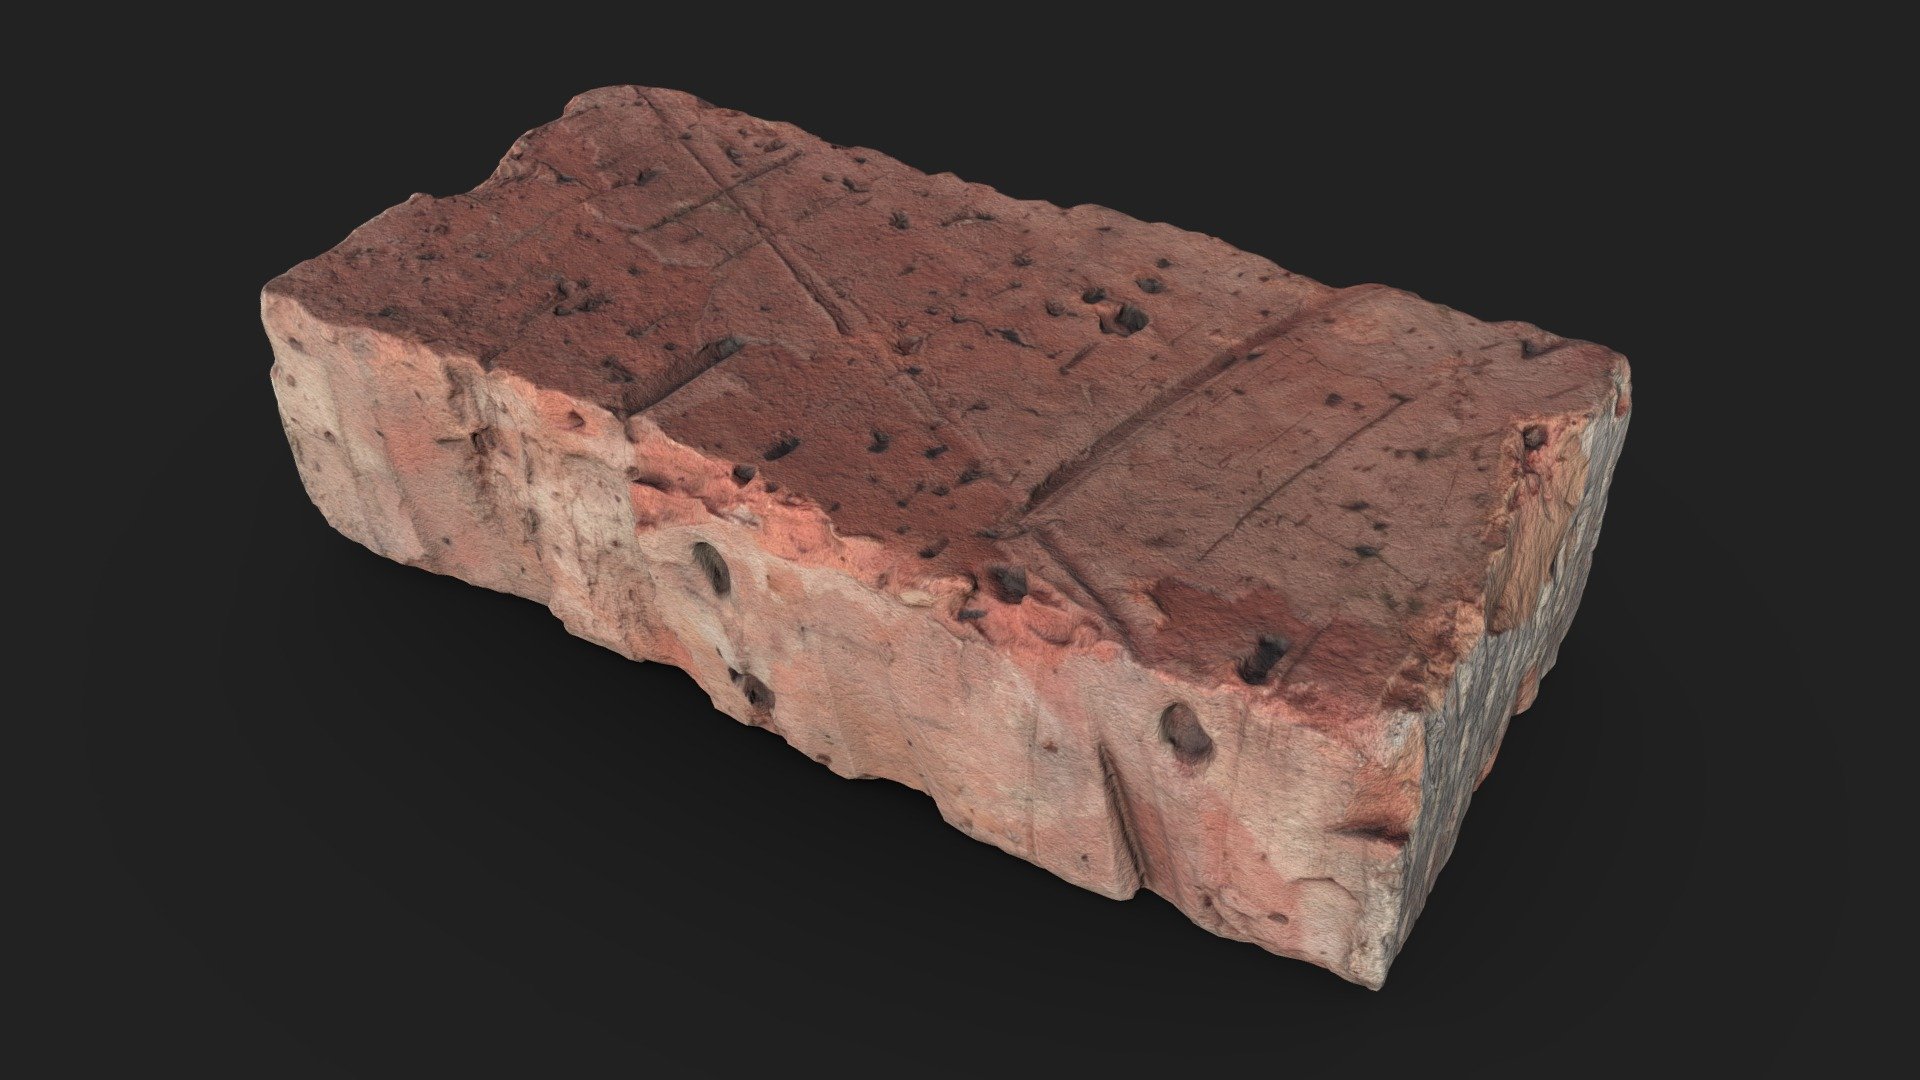 Brick, which is perfect for creating ruins or abandoned buildings.

Technical specifications:

Close-up scan model

Optimized model

non-overlapping UV map

ready for animation

PBR textures 4K resolution: Normal, Roughness, Albedo, Ambient Occlusion maps

Download package includes FBX, which are applicable for 3ds Max, Maya, Unreal Engine, Unity, Blender.

Enjoy! - Old Brick Scan - Buy Royalty Free 3D model by U3DA (@unreal.artists) 3d model